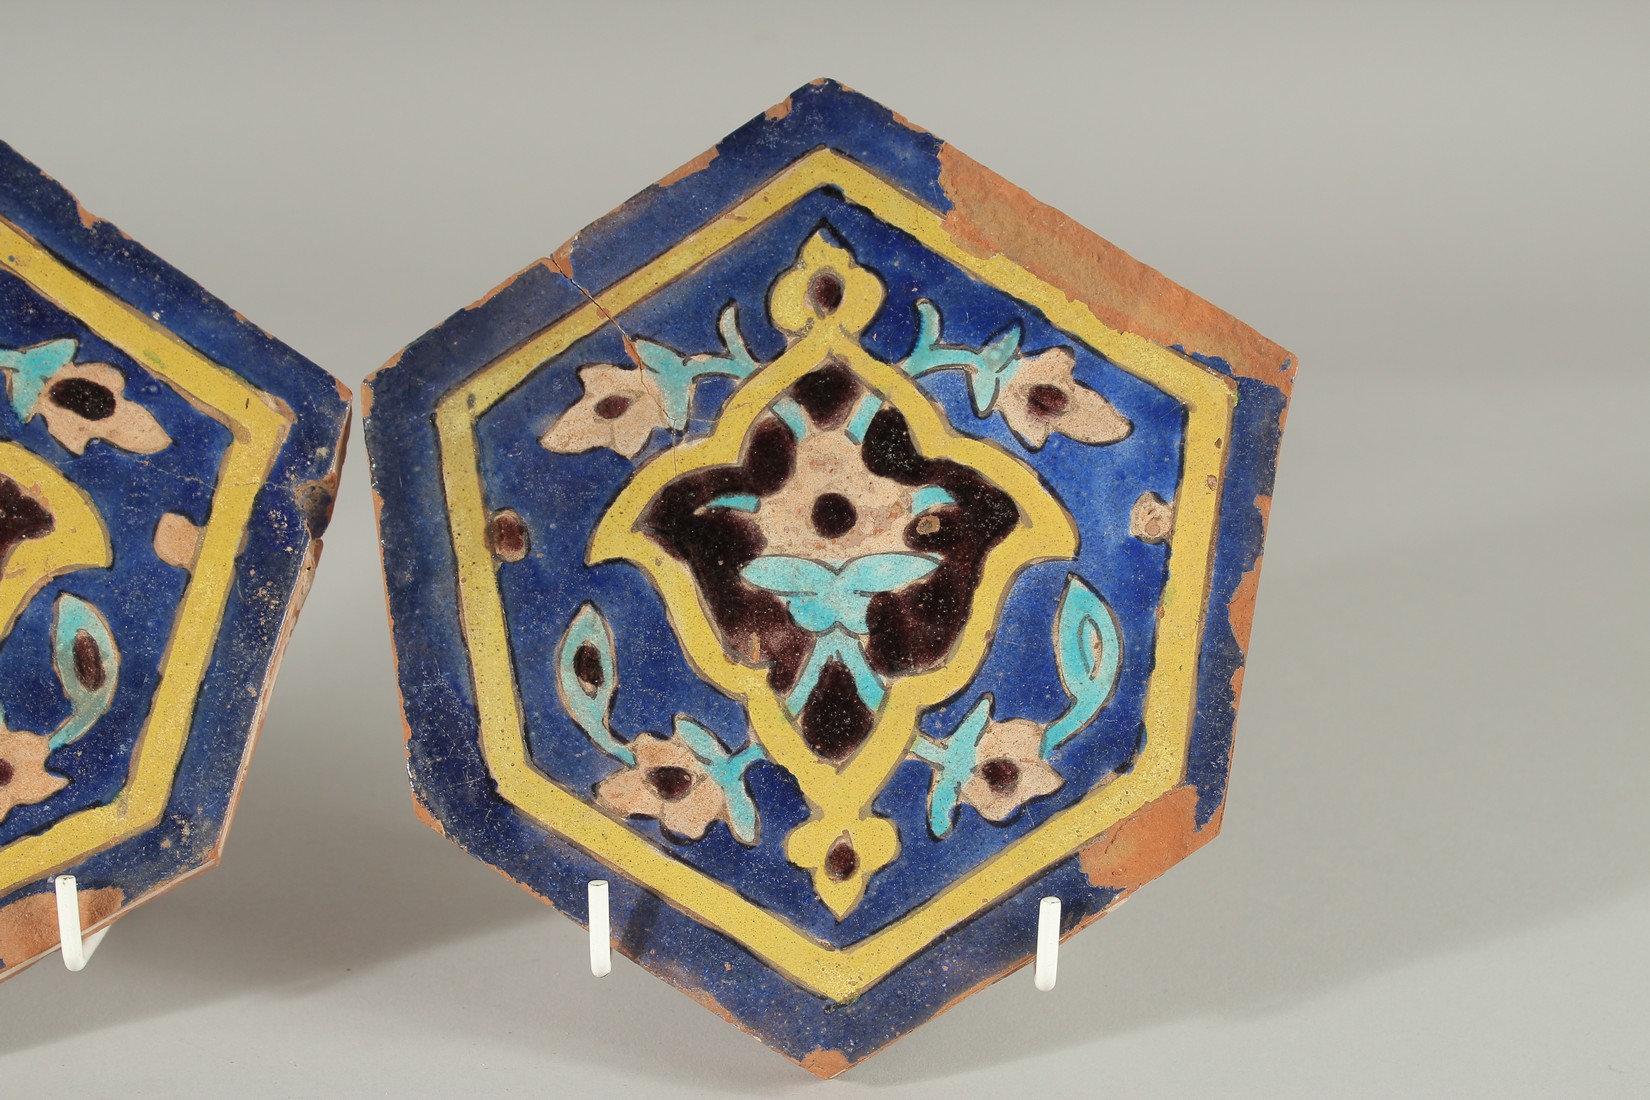 A PAIR OF 15TH-16TH CENTURY PERSIAN TIMURID POTTERY TILES. - Image 3 of 4